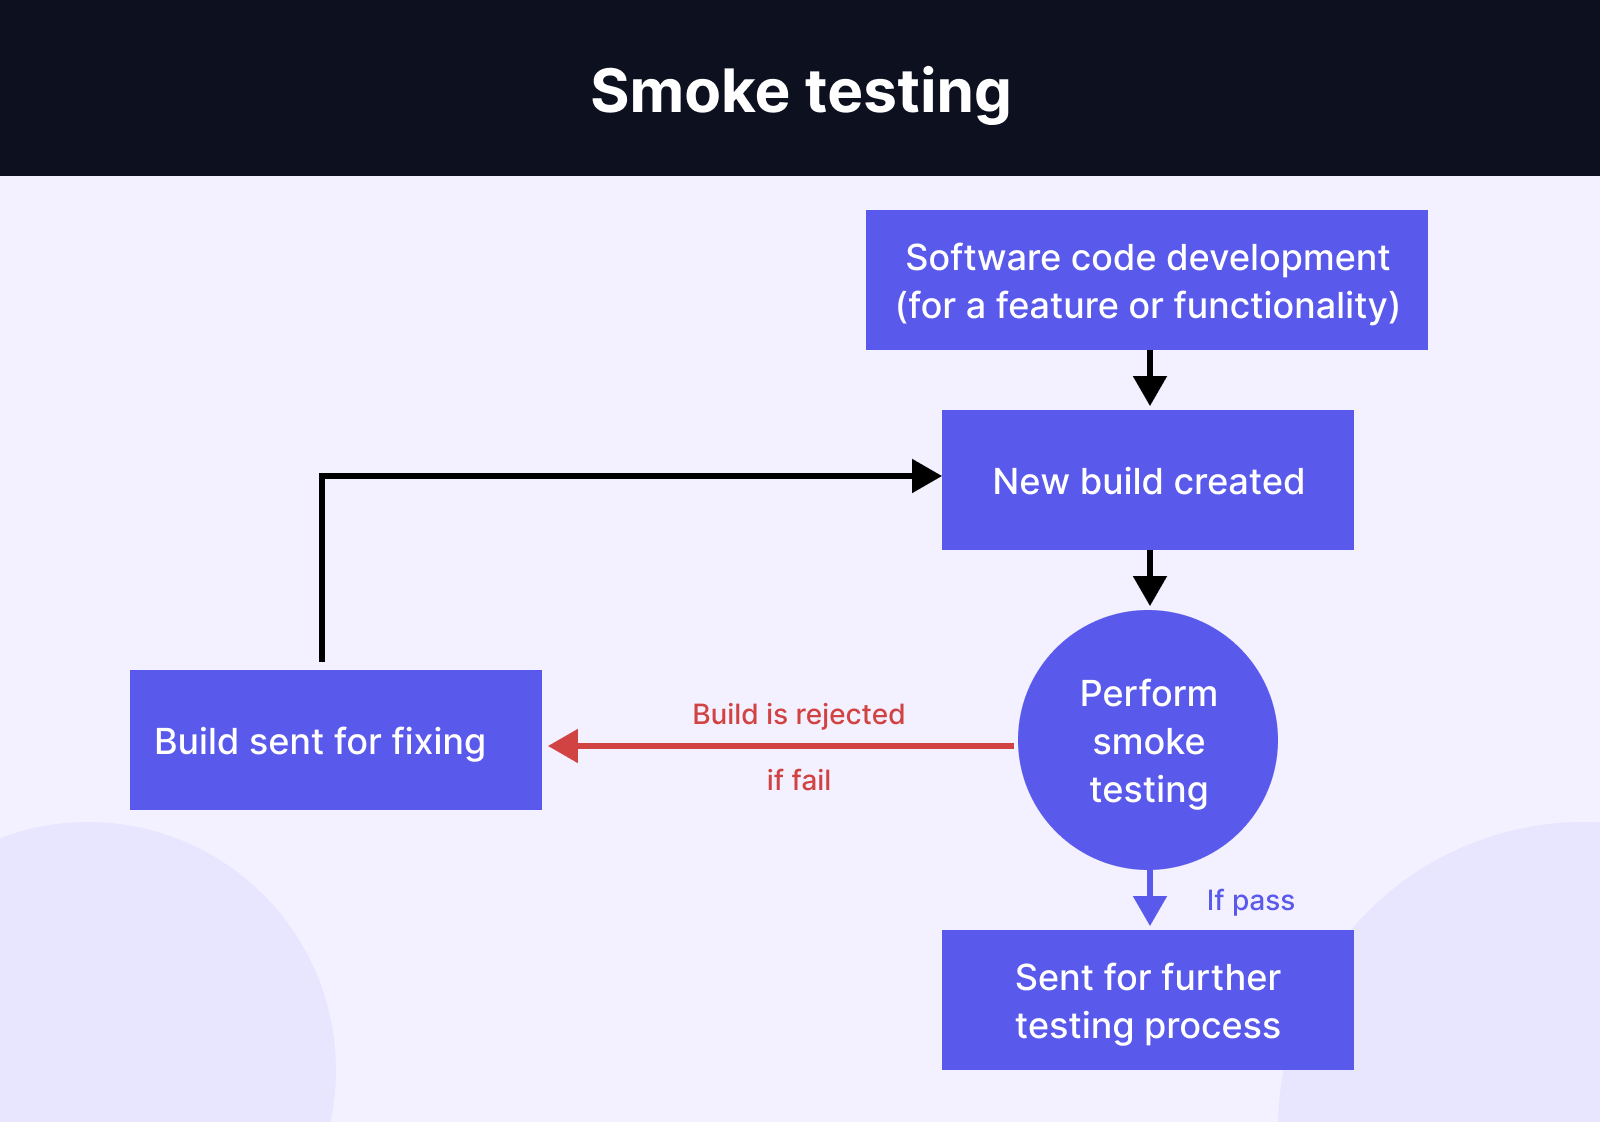 The definition and process of smoke testing